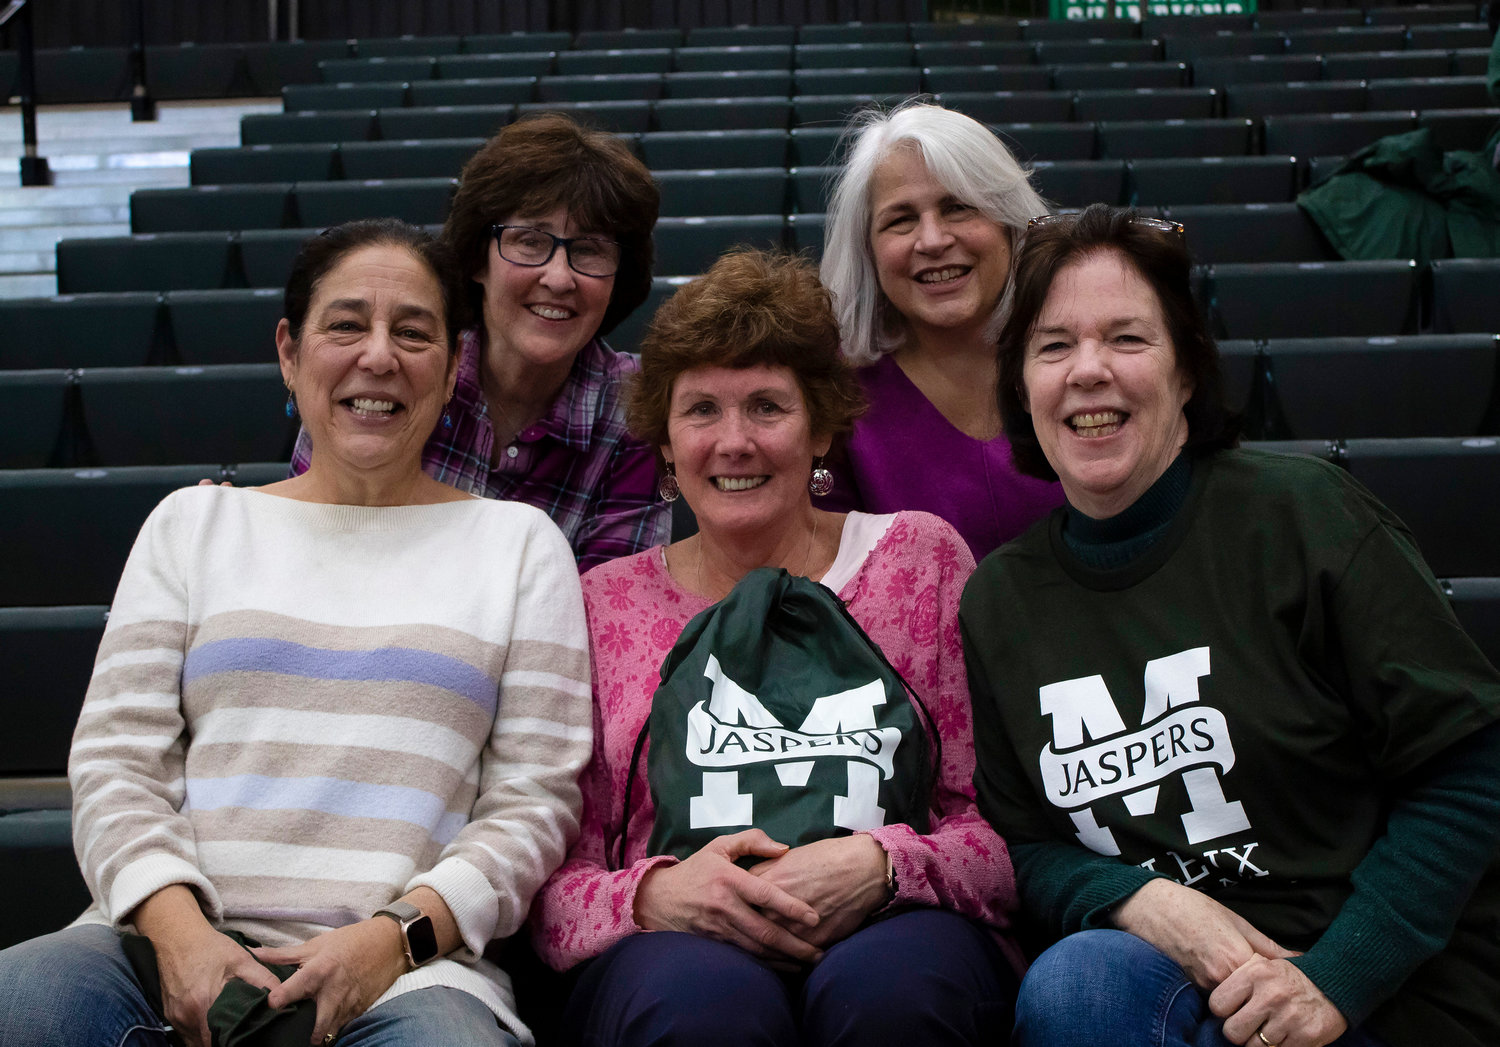 Rachelle Carforo, Lisa Toscano and Joanie McCrystal were among the six players from the 1978 Hudson Valley Conference Jasper championship team who were at Draddy Gymnasium for the Title IX celebration last weekend.